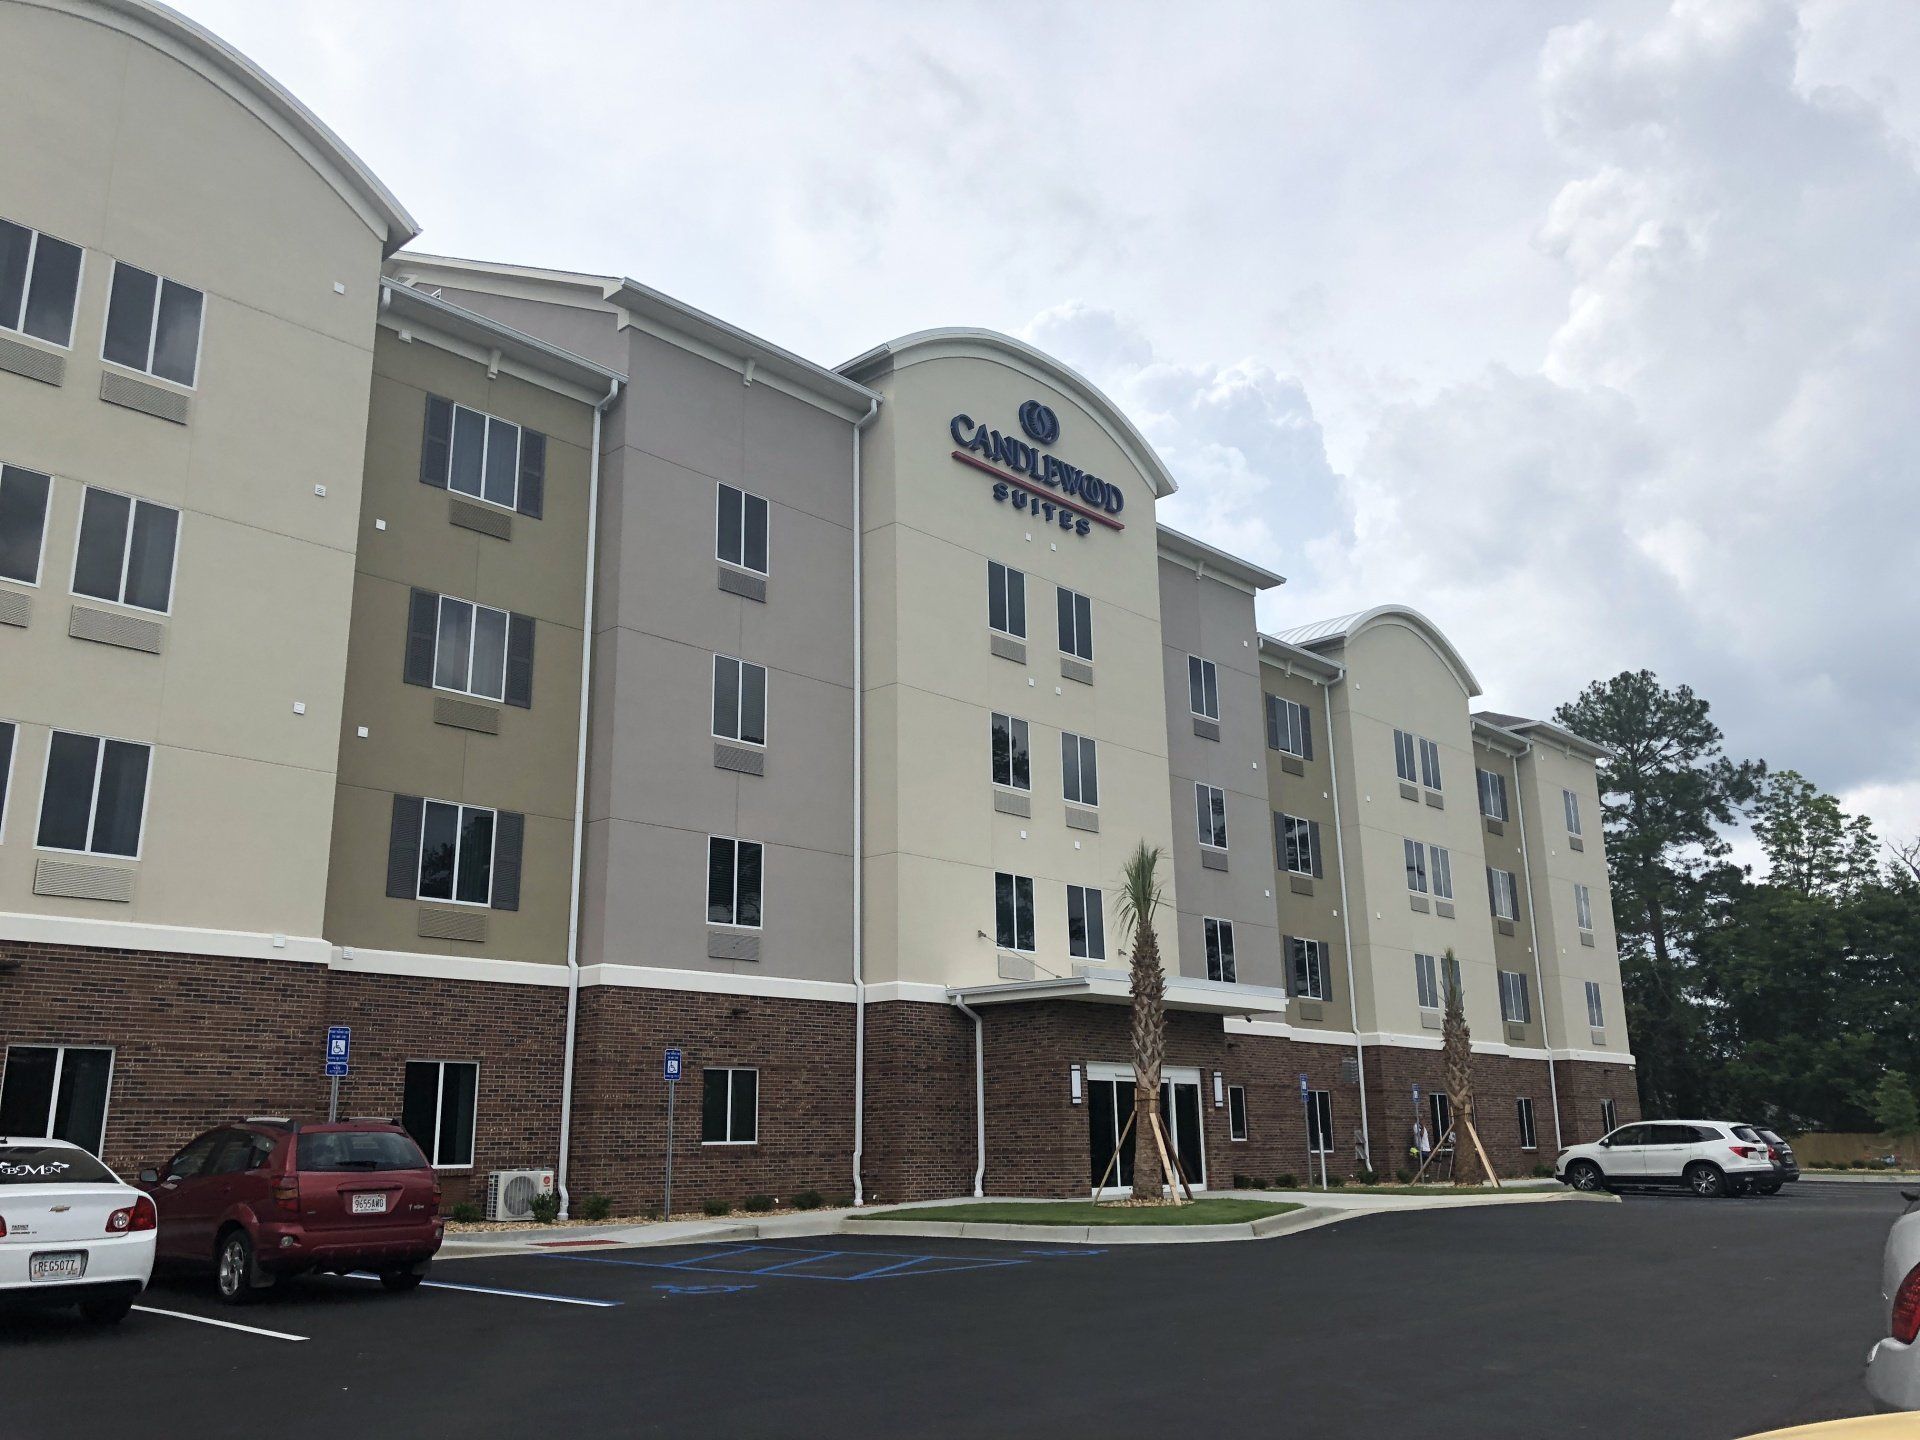 Exterior and parking lot of the Candlewood Suites in Valdosta, GA.